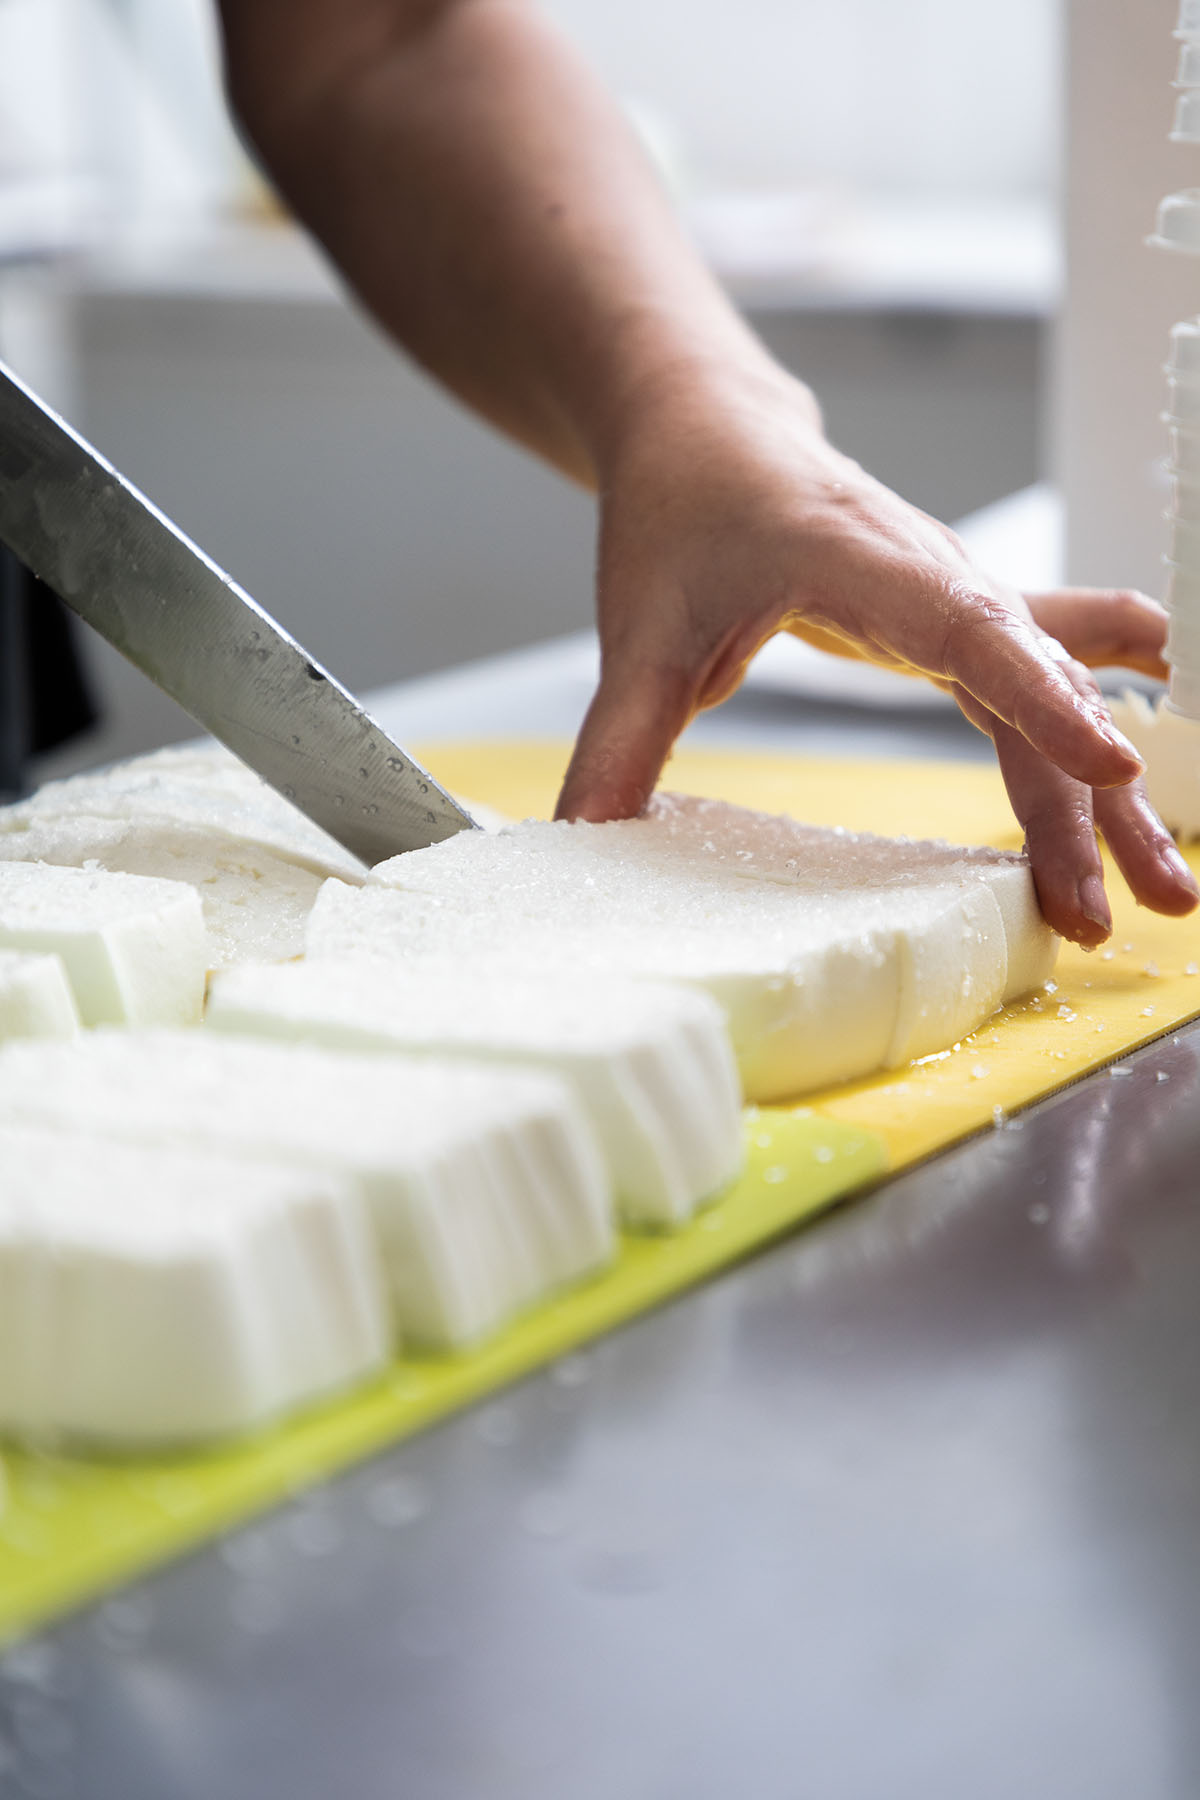 A person holds large white curds of cheese and cuts them on a yellow cutting board